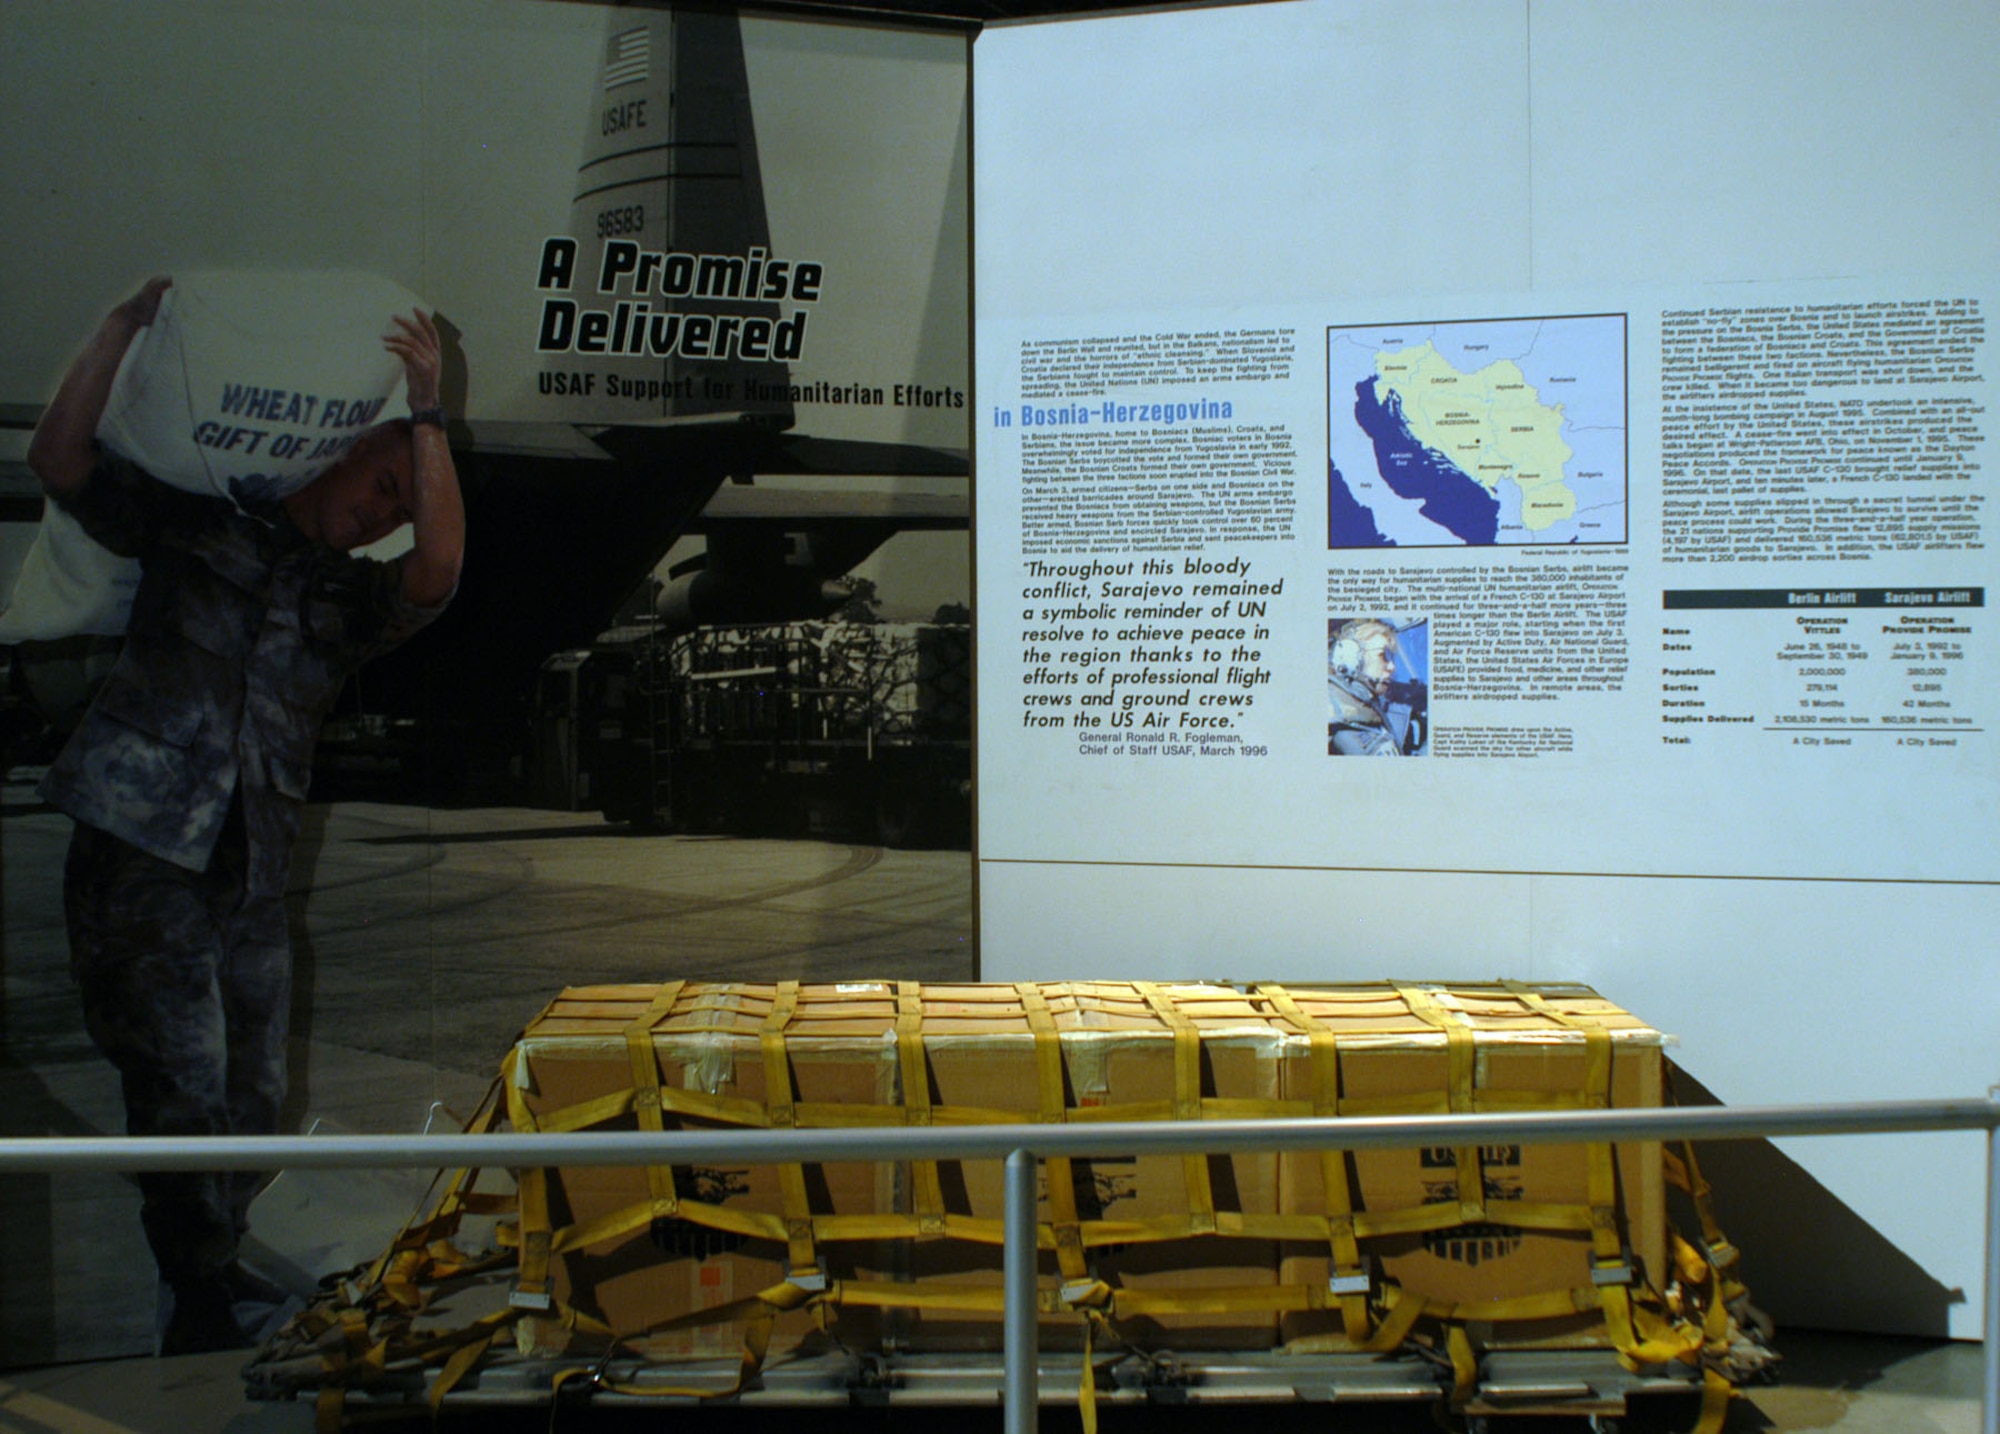 DAYTON, Ohio - A Promise Delivered exhibit in the Cold War Gallery at the National Museum of the U.S. Air Force. (U.S. Air Force photo)  